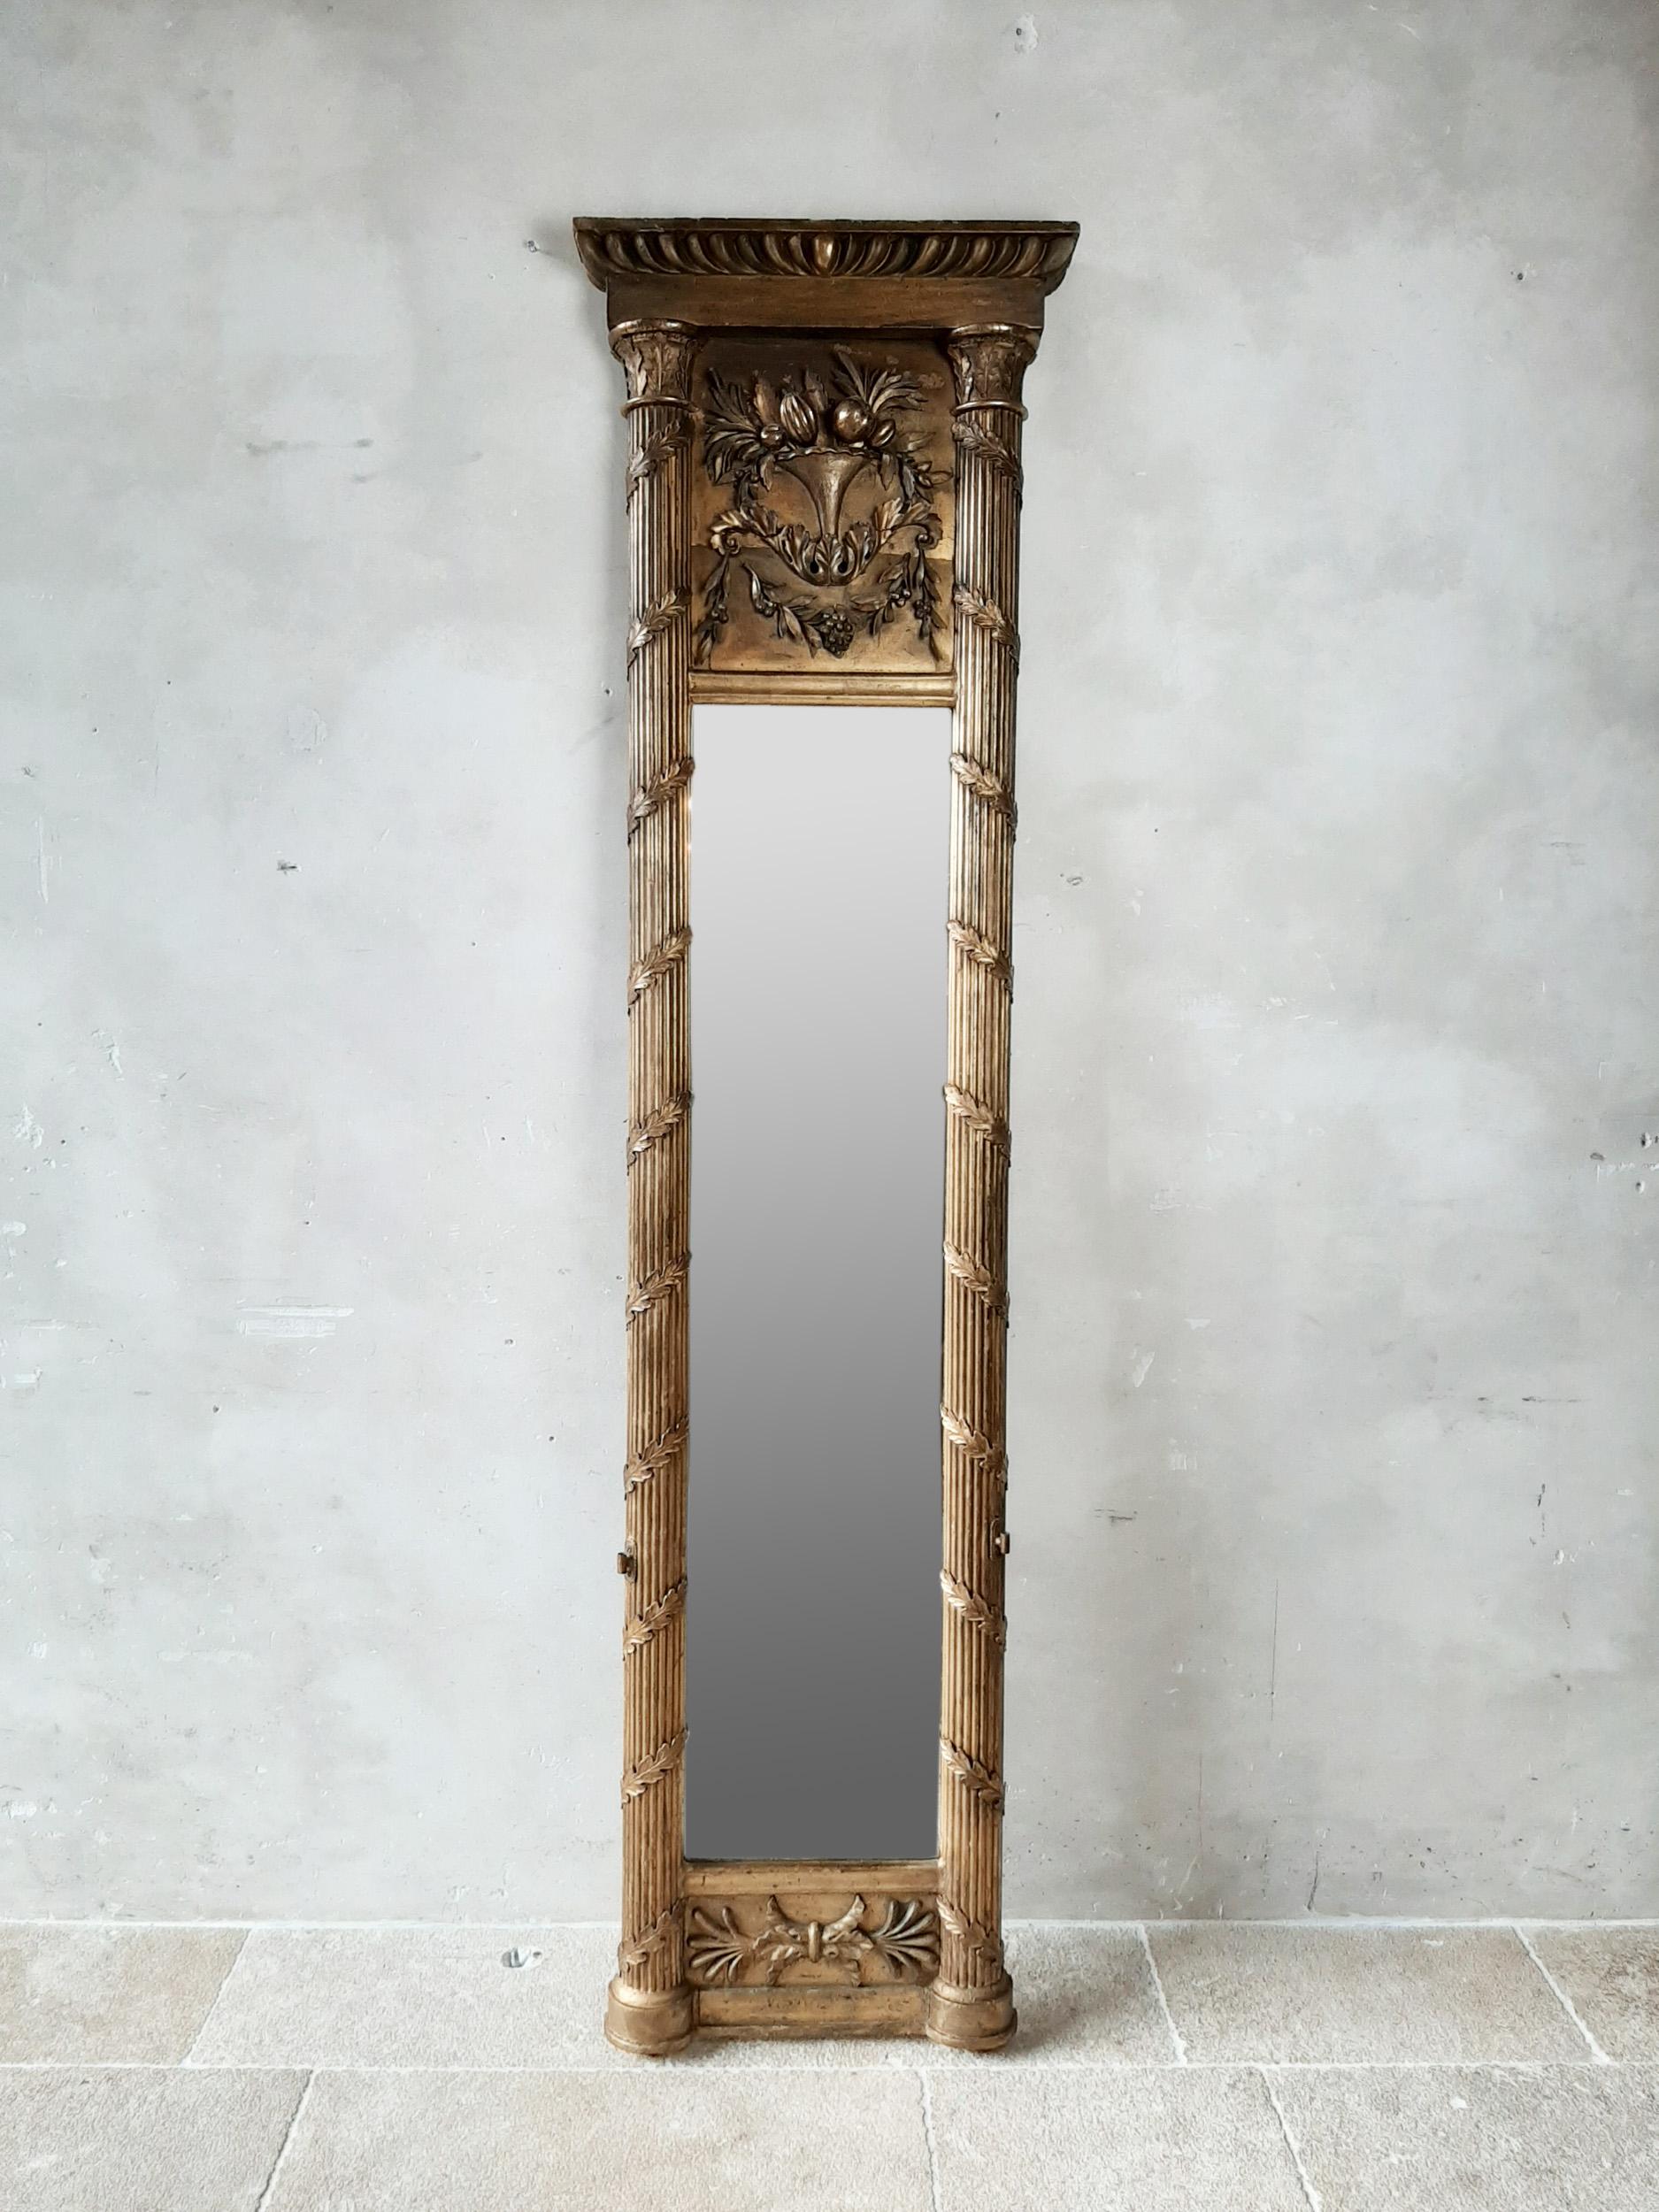 19th century very high, narrow pennant giltwood mirror in Empire style. A mirror that is ideal for use between two windows due to its size. Very rich version with semicircular columns with fluting and capitals decorated with gesso leafs. At the top